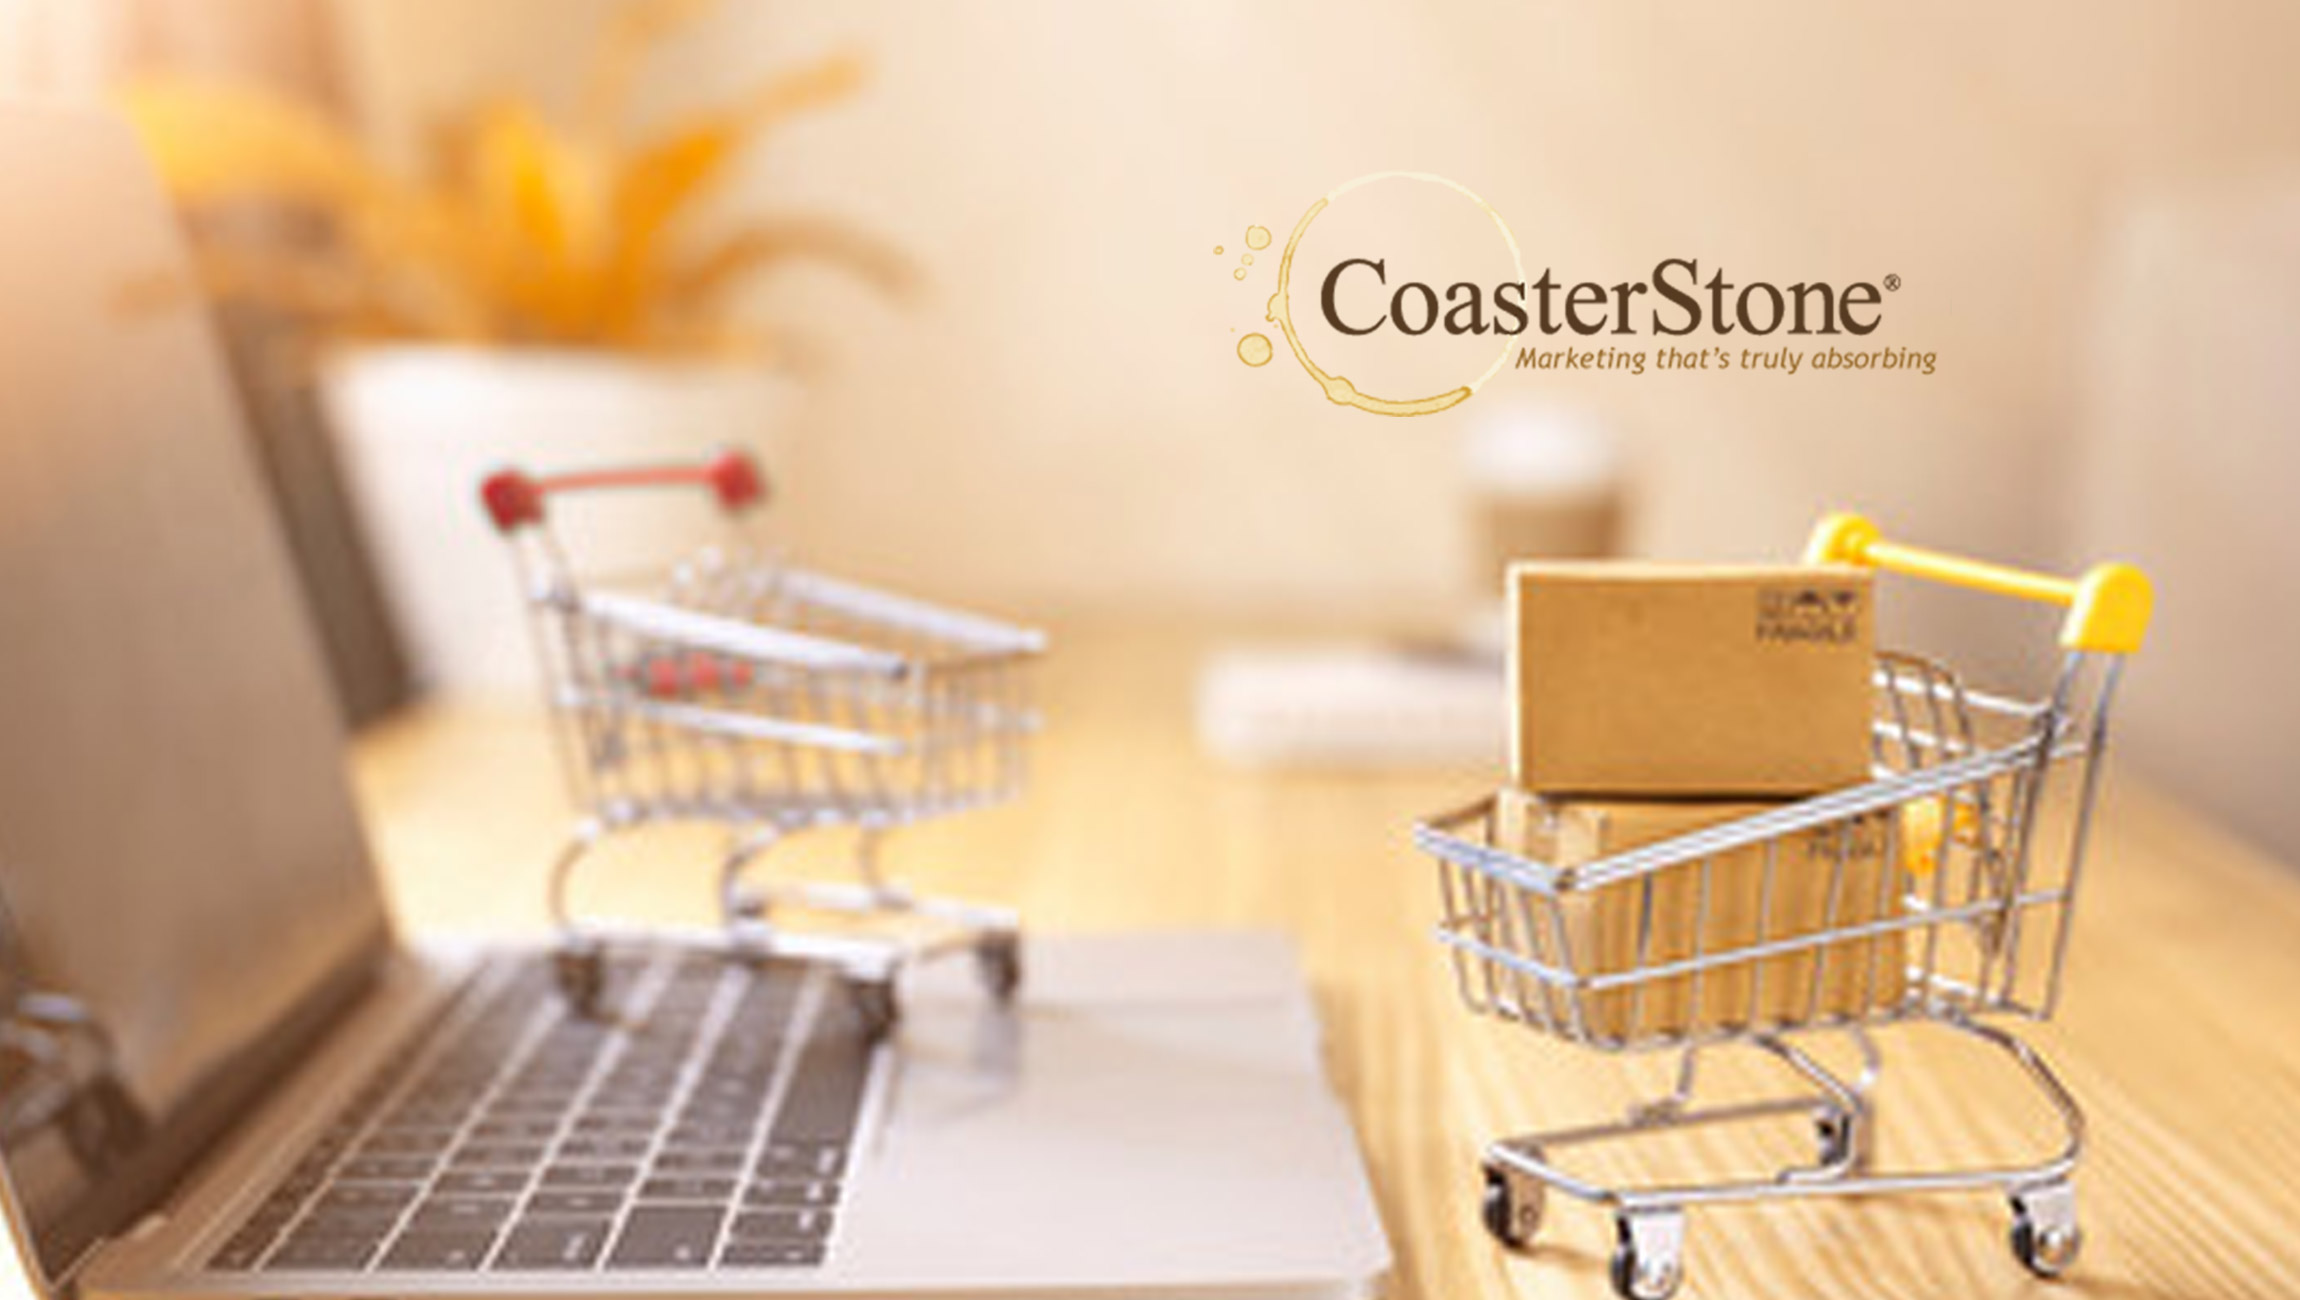 CoasterStone Soaks Up the Benefits of Brightpearl’s Retail Operating Solution